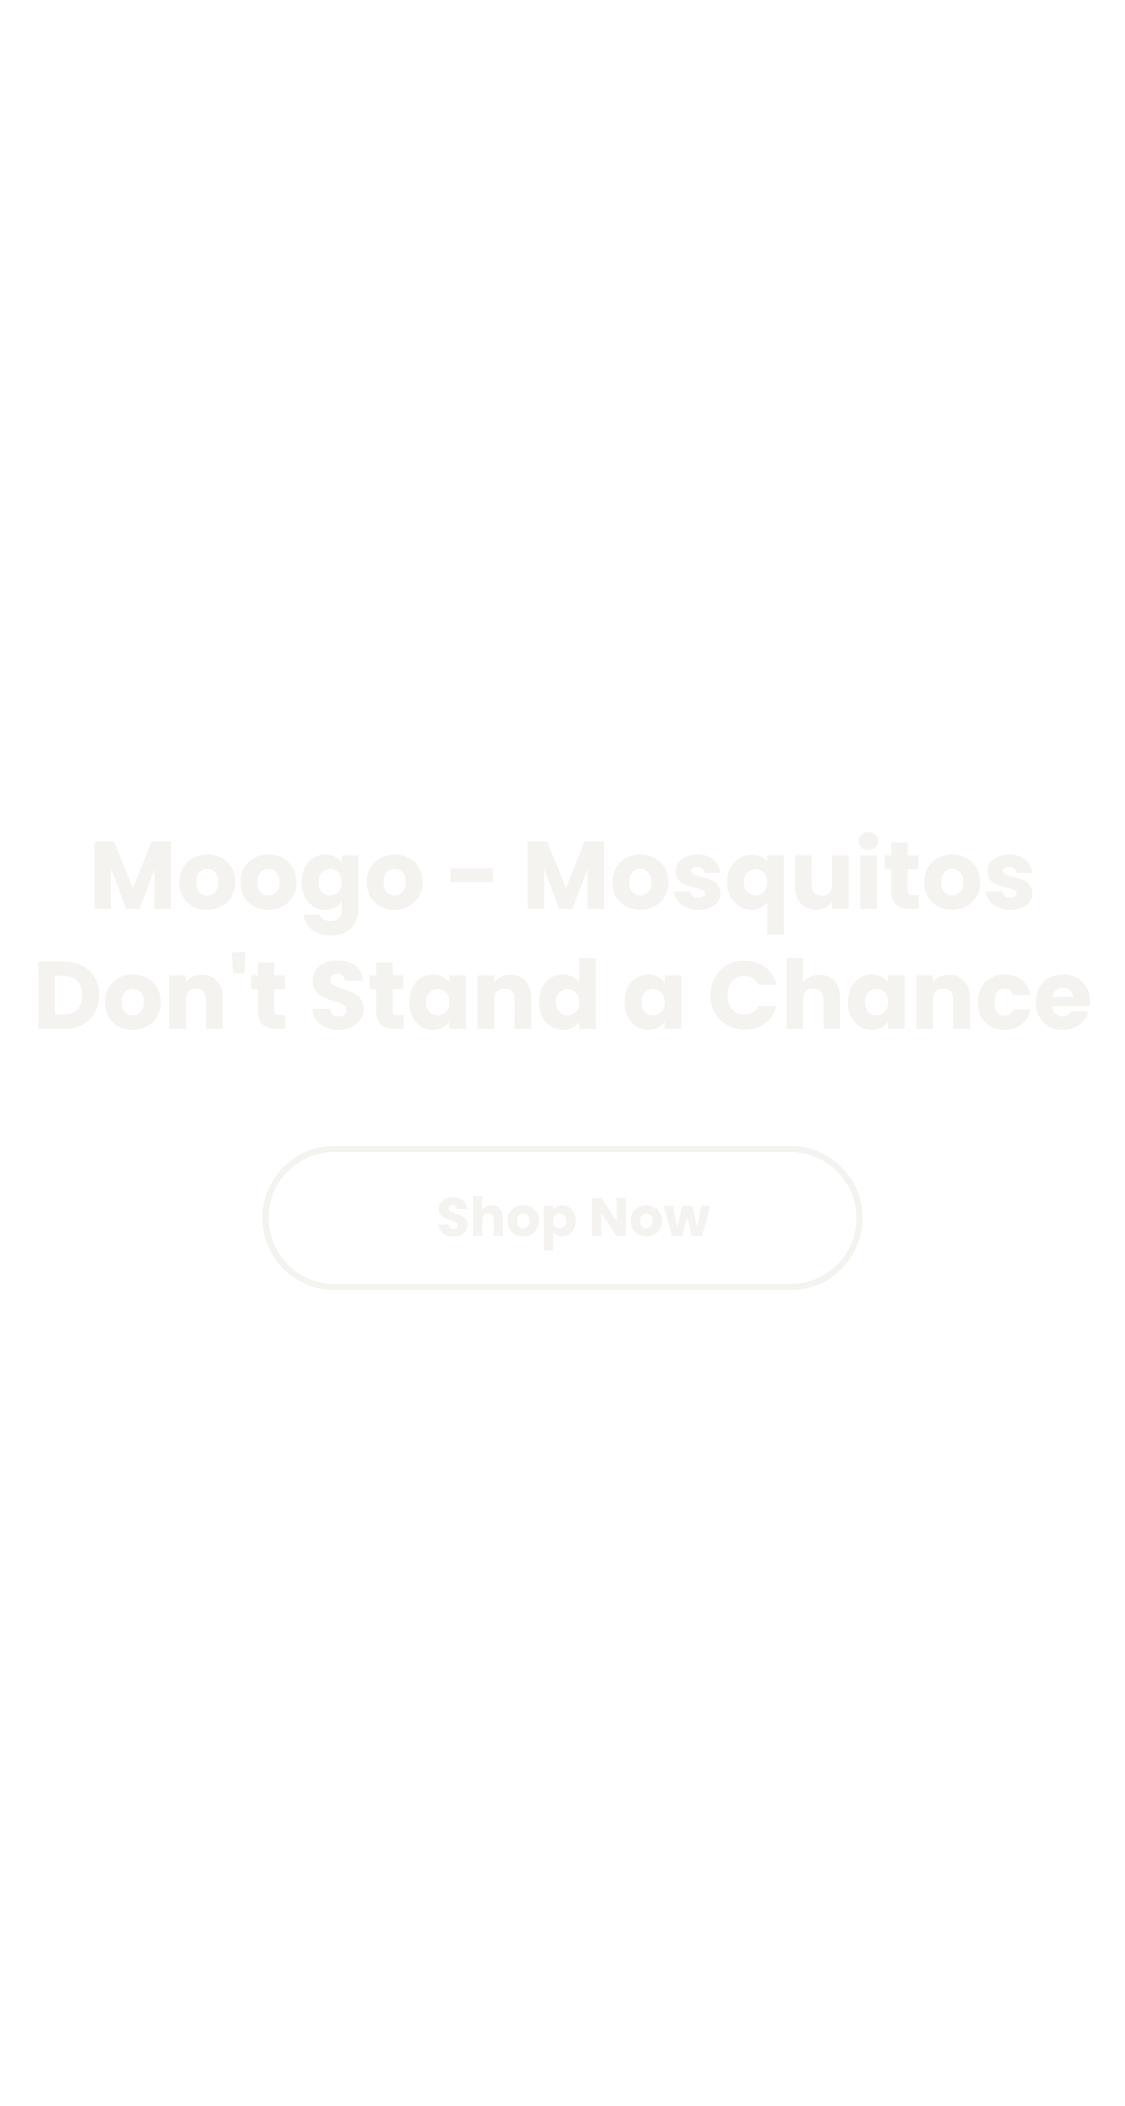 Moogo - mosquitos don't stand a chance